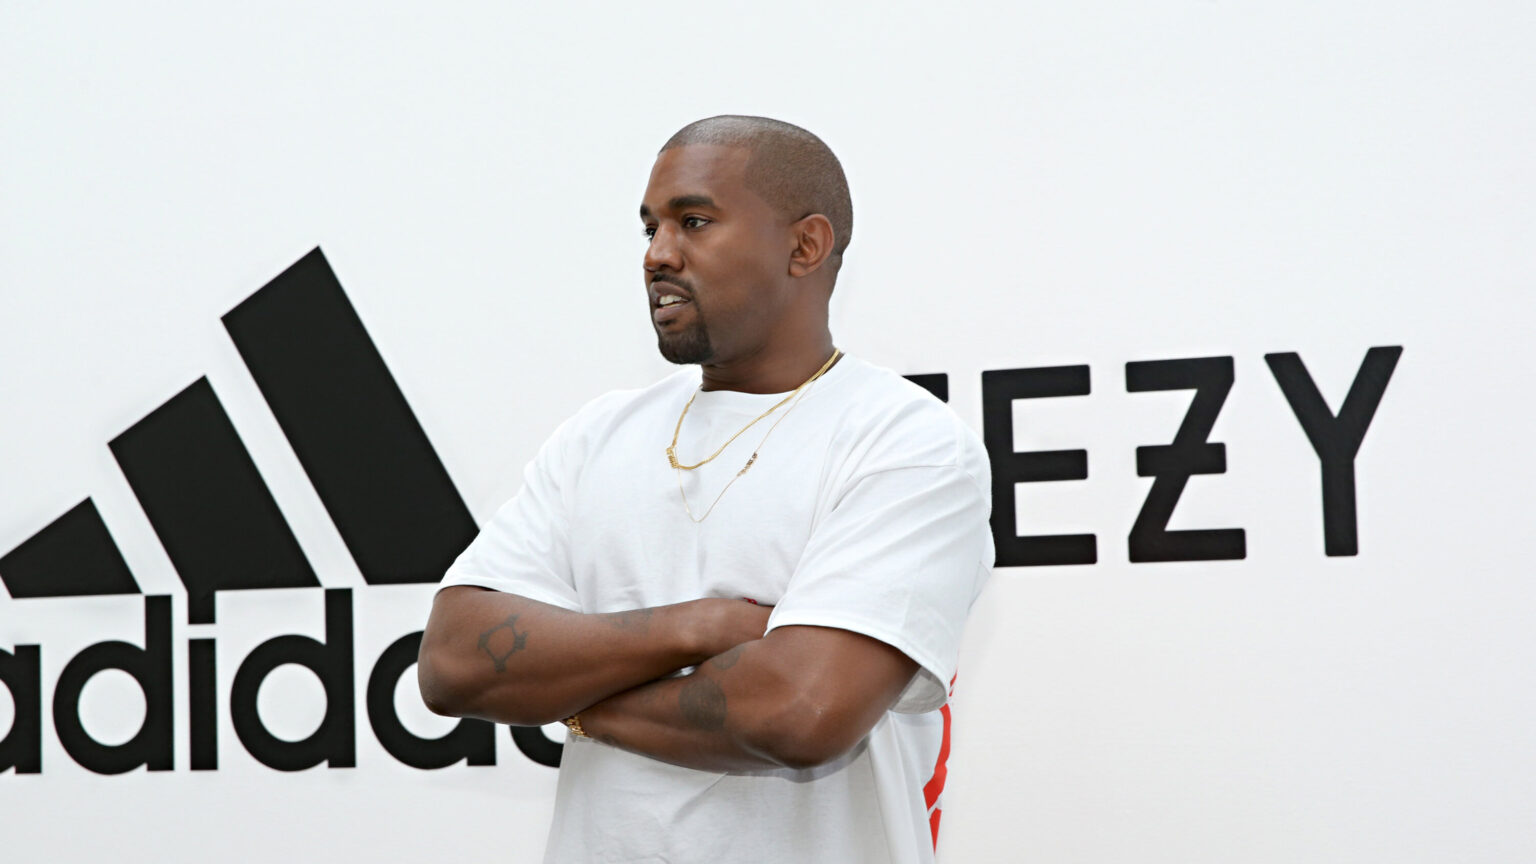 Adidas cuts ties with Kanye West over antisemitic comments – How much money has he lost?